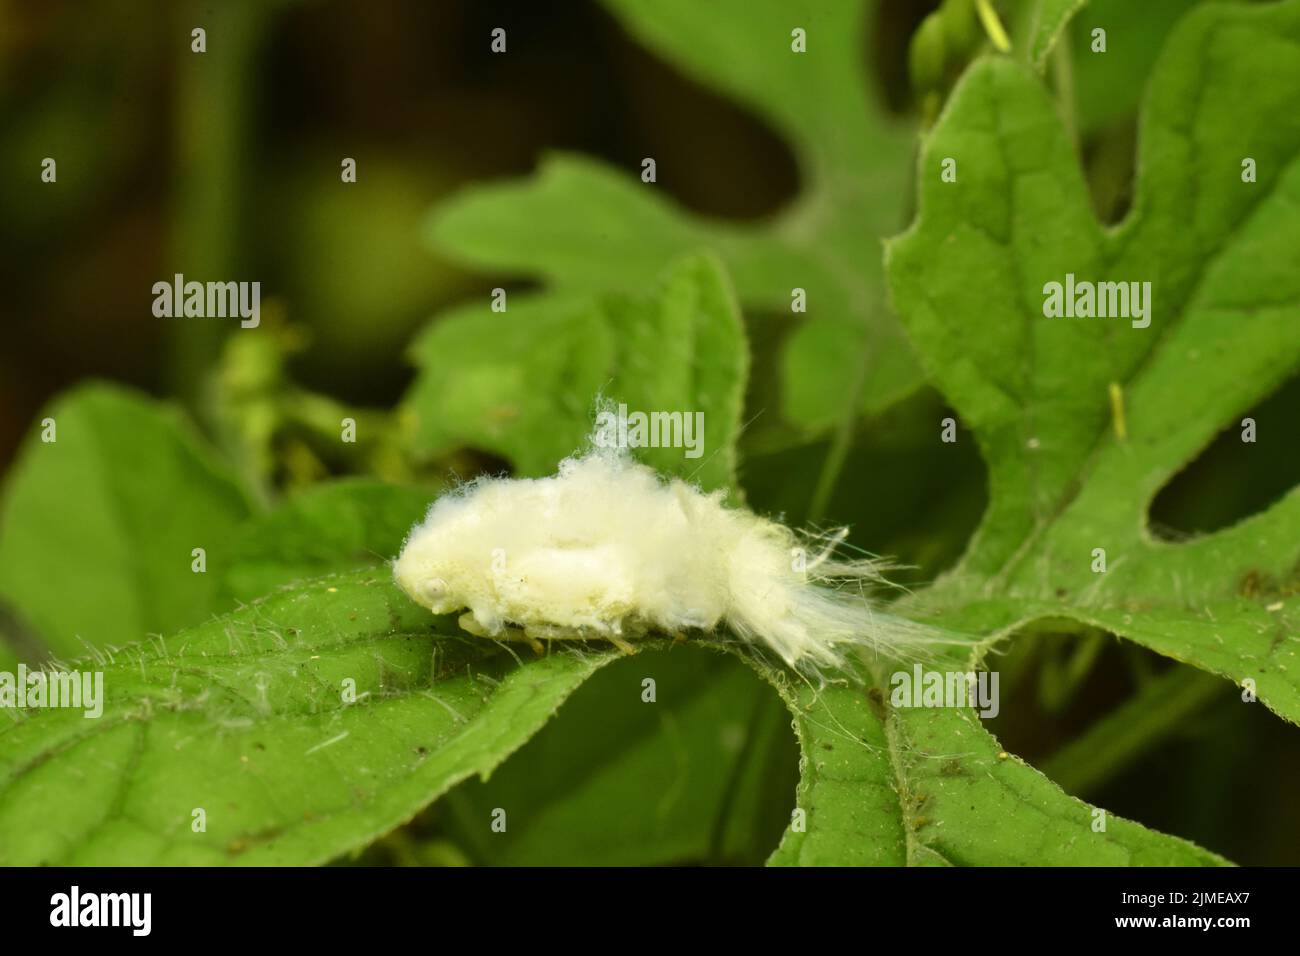 A close up photo of june's snowfall planthopper resting on green leaf. Stock Photo